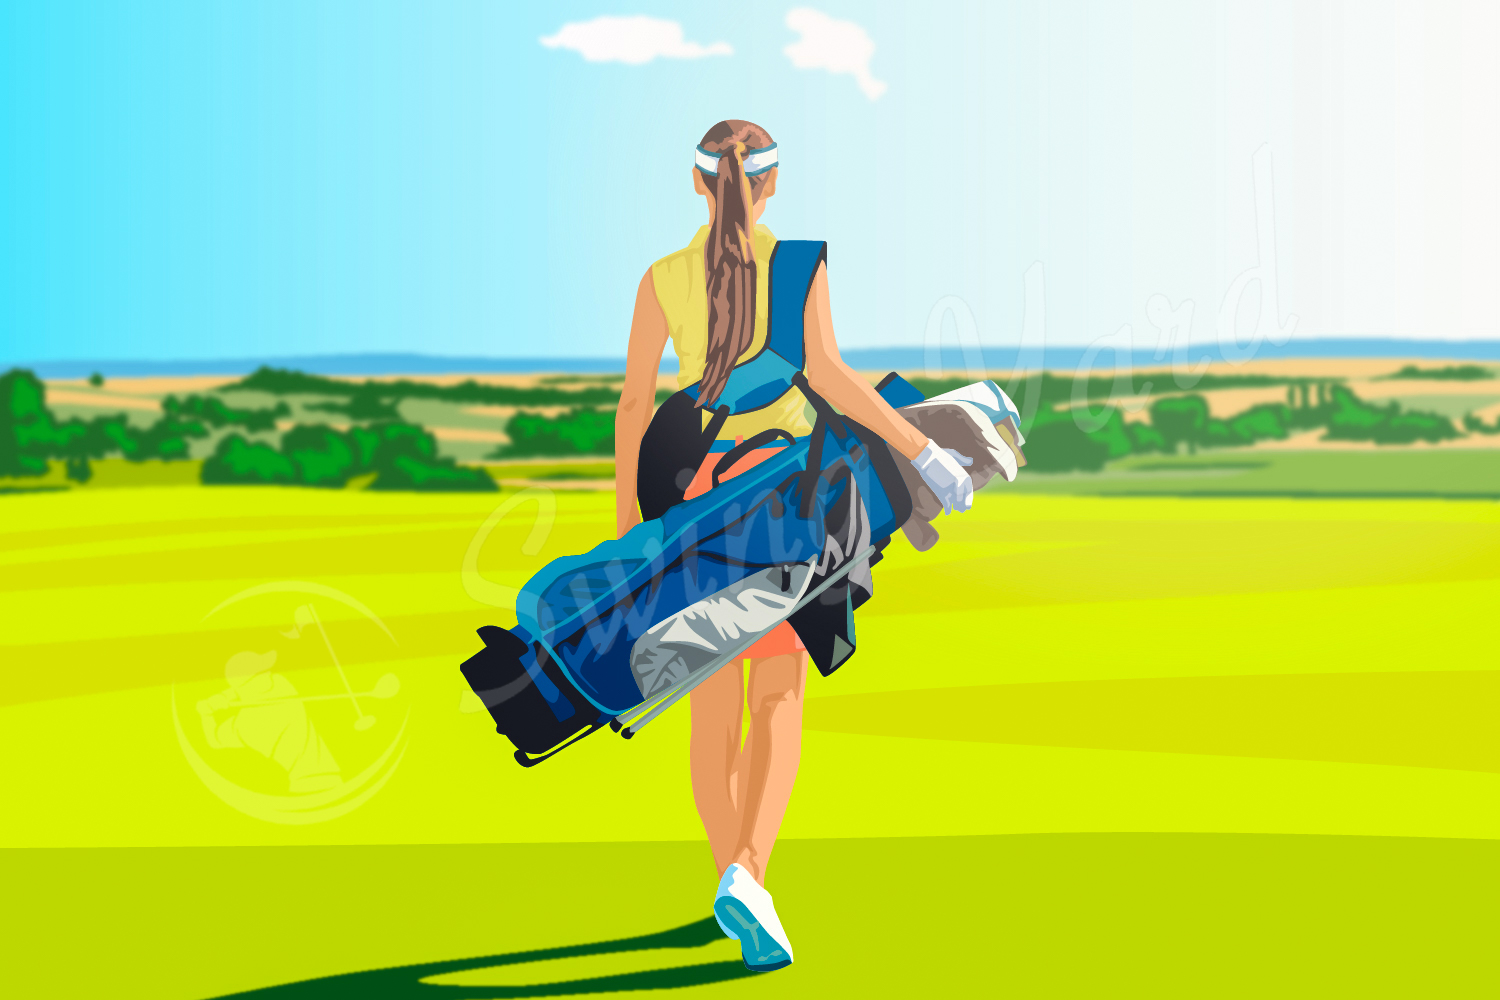 A golfer carrying a complete set of women's clubs